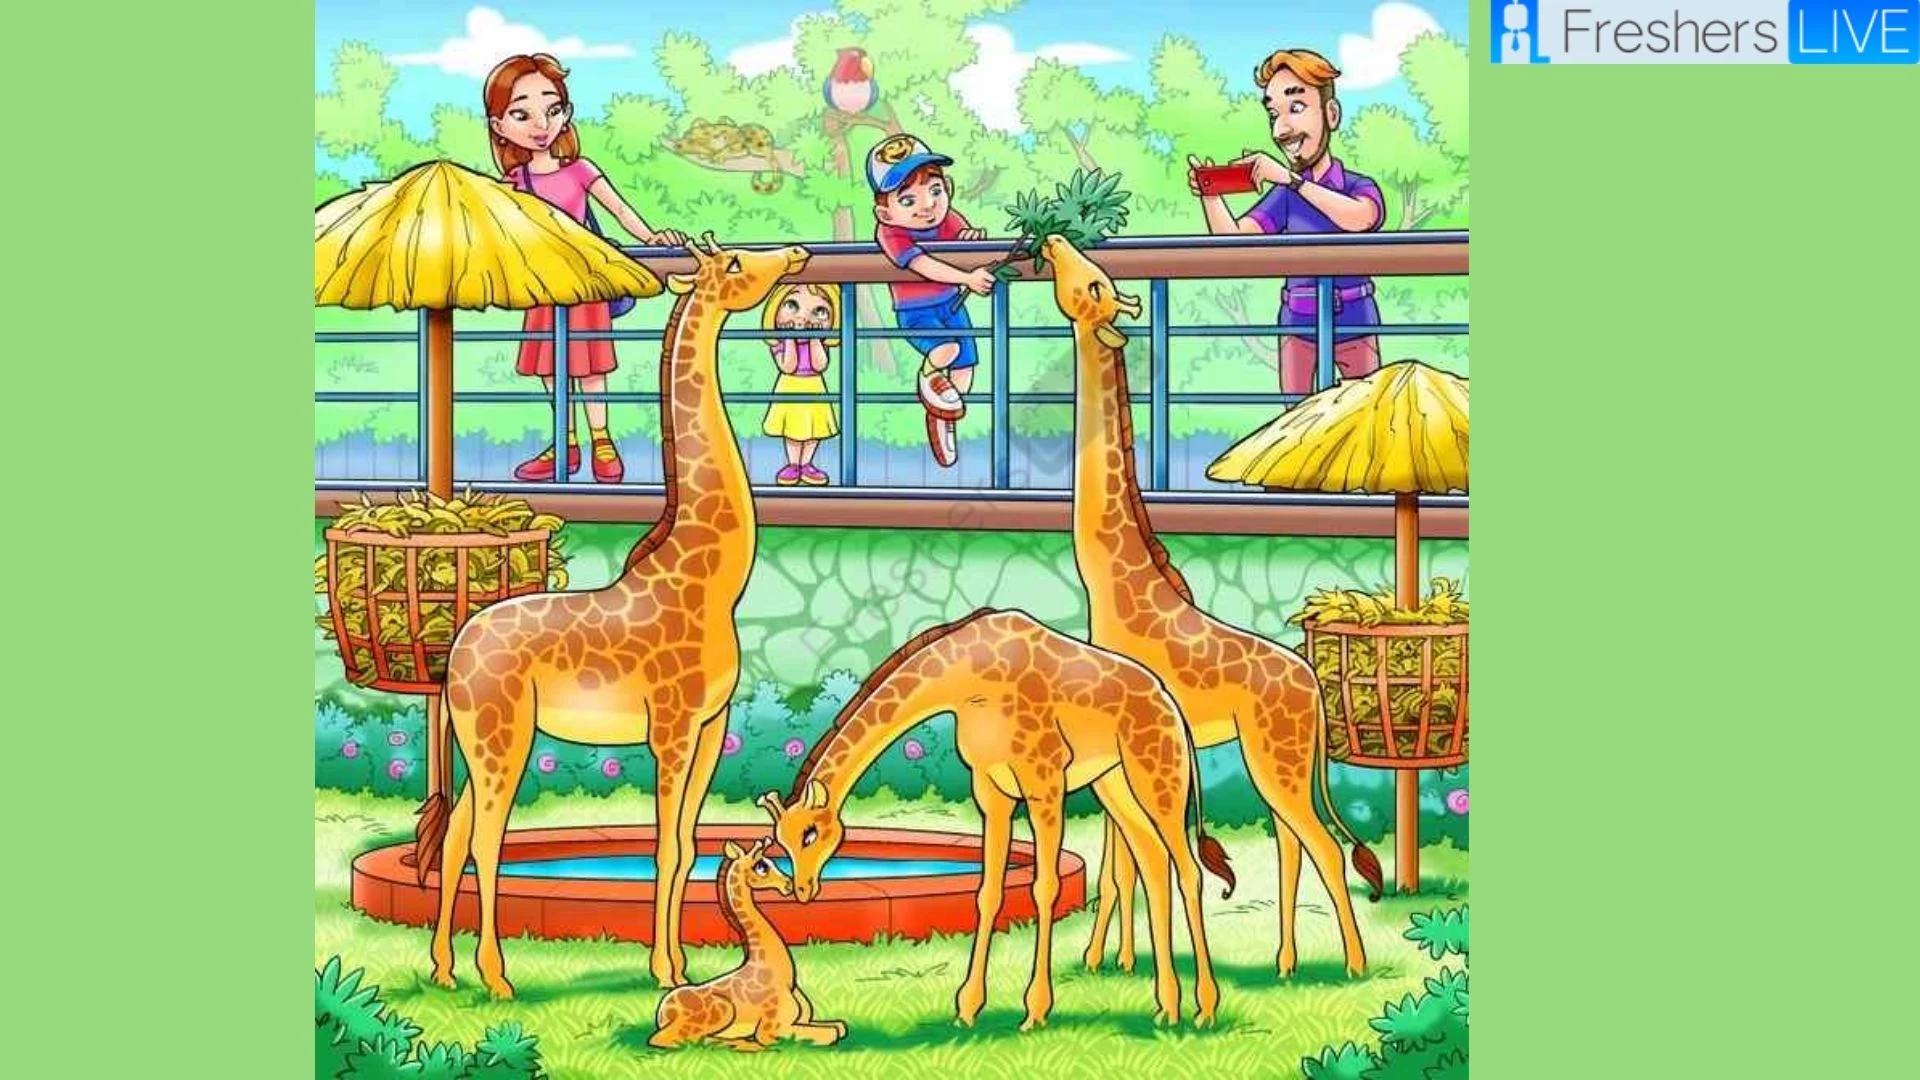 Only 5% Can Spot a Monkey Hidden Inside the Zoo Picture in less than 6 secs!